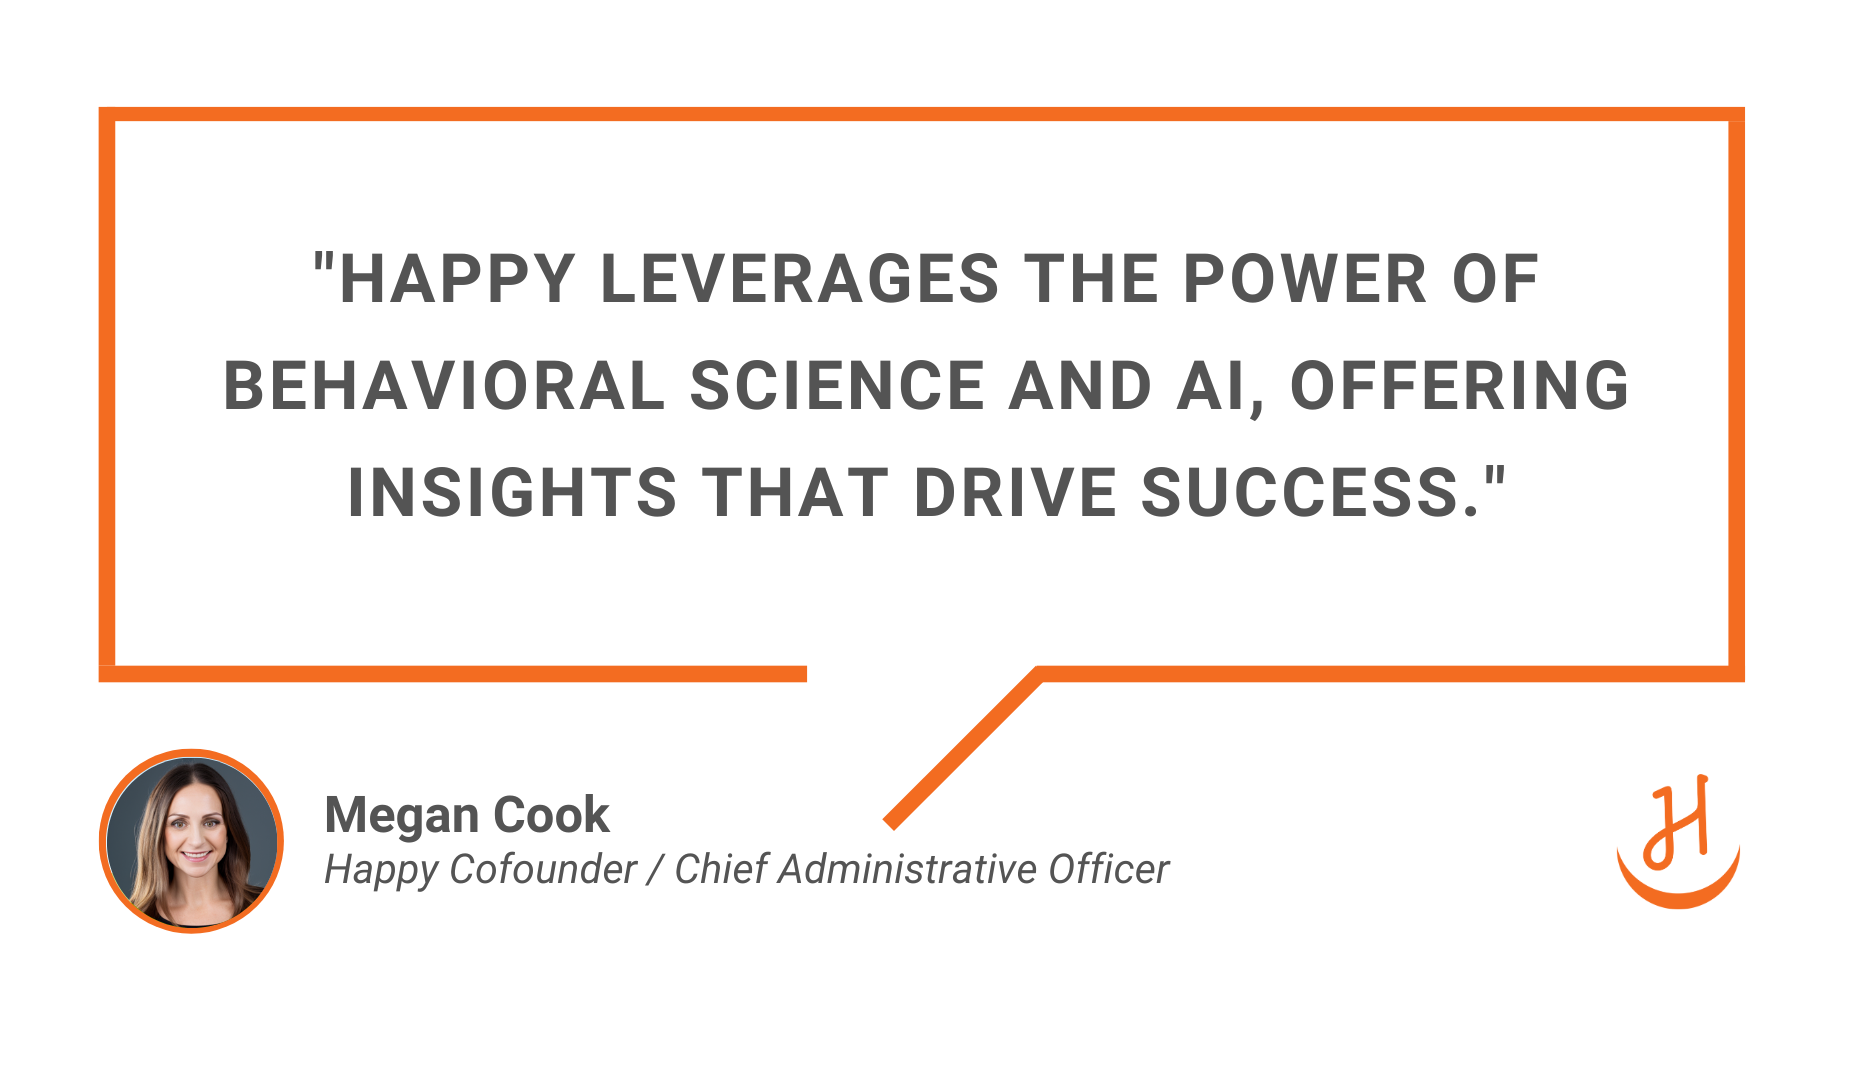 "Happy leverages the power of behavioral science and ai, offering insights that drive success." Quote by Megan Cook Cofounder and CAO of Happy Companies